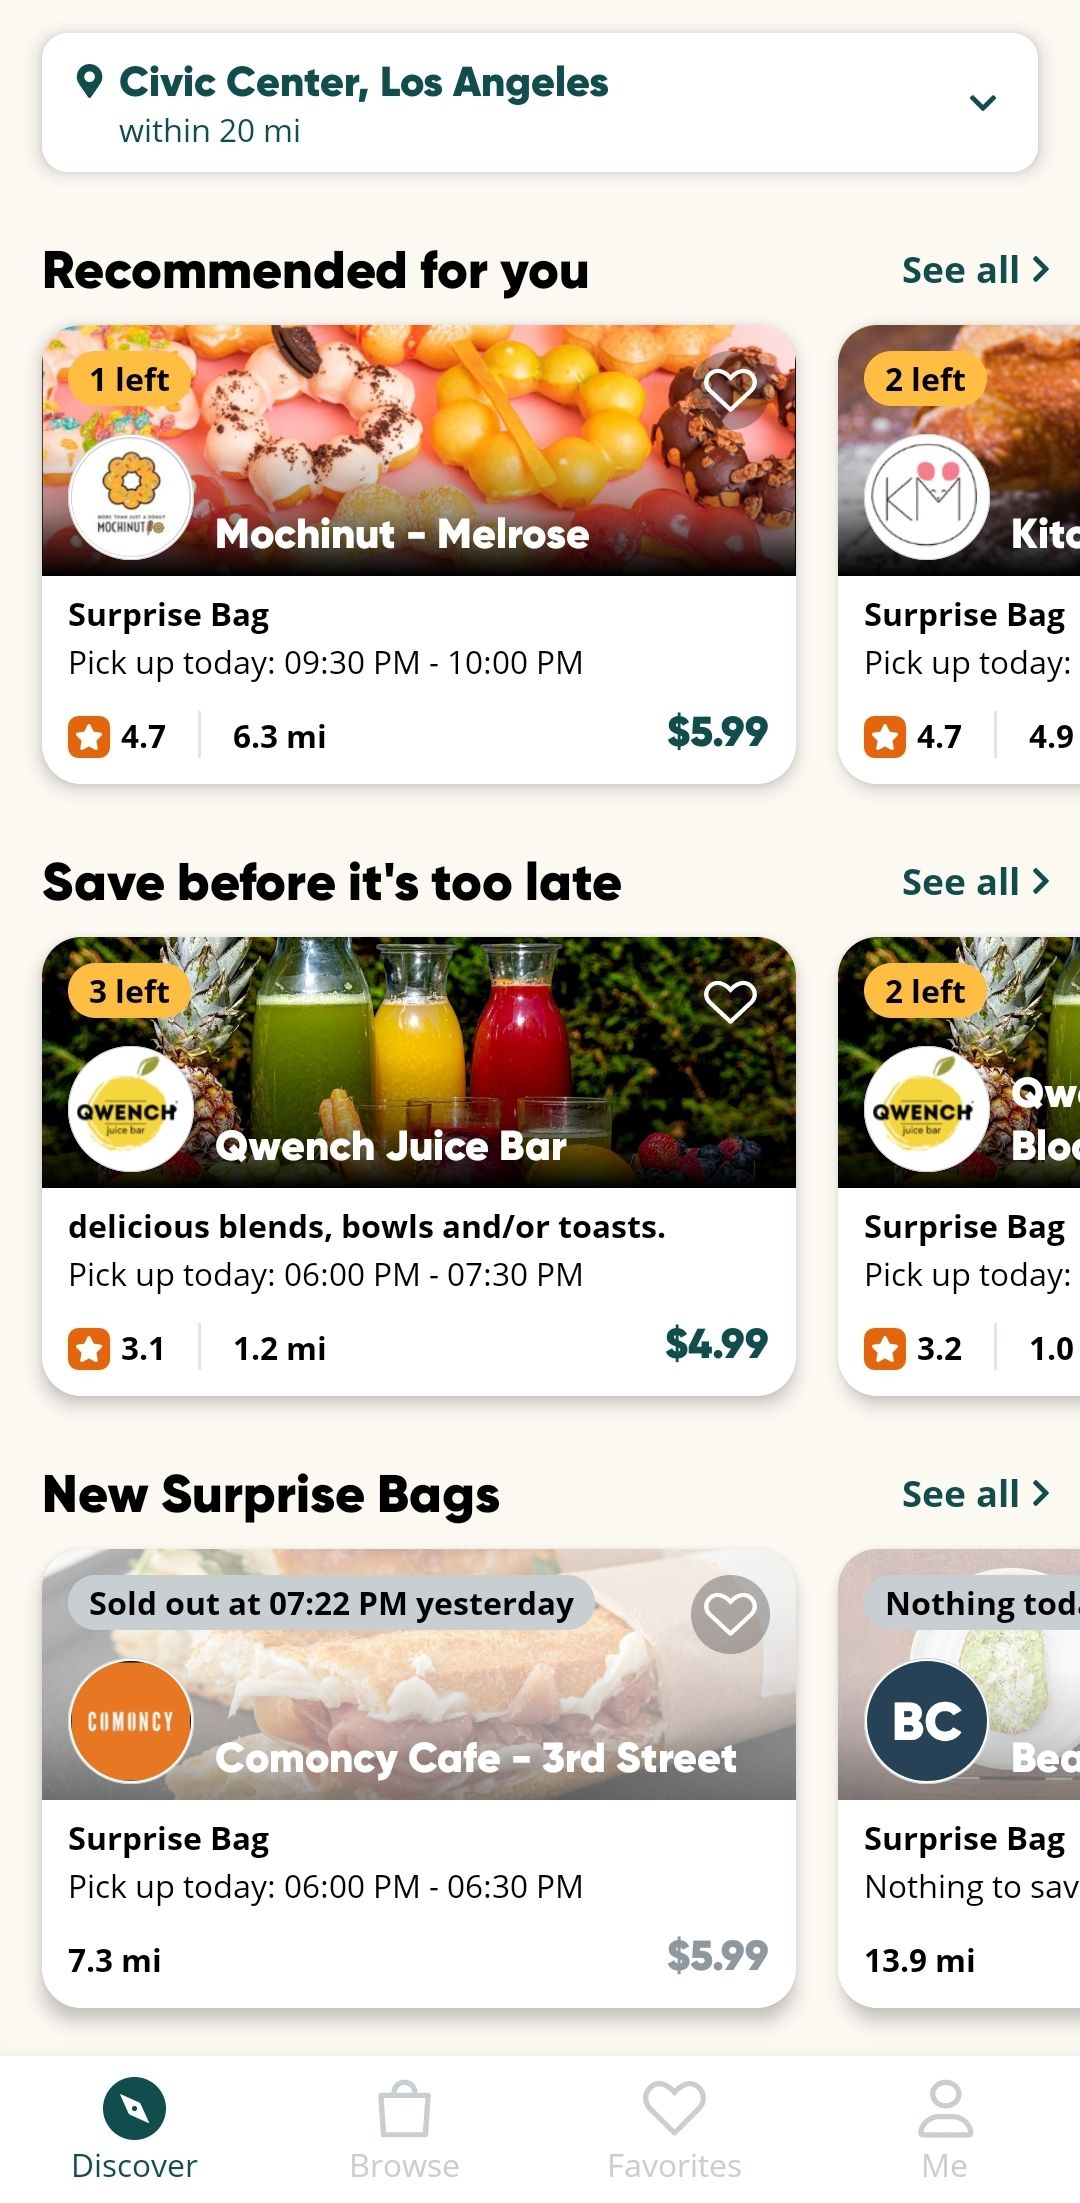 Too Good To Go food waste app